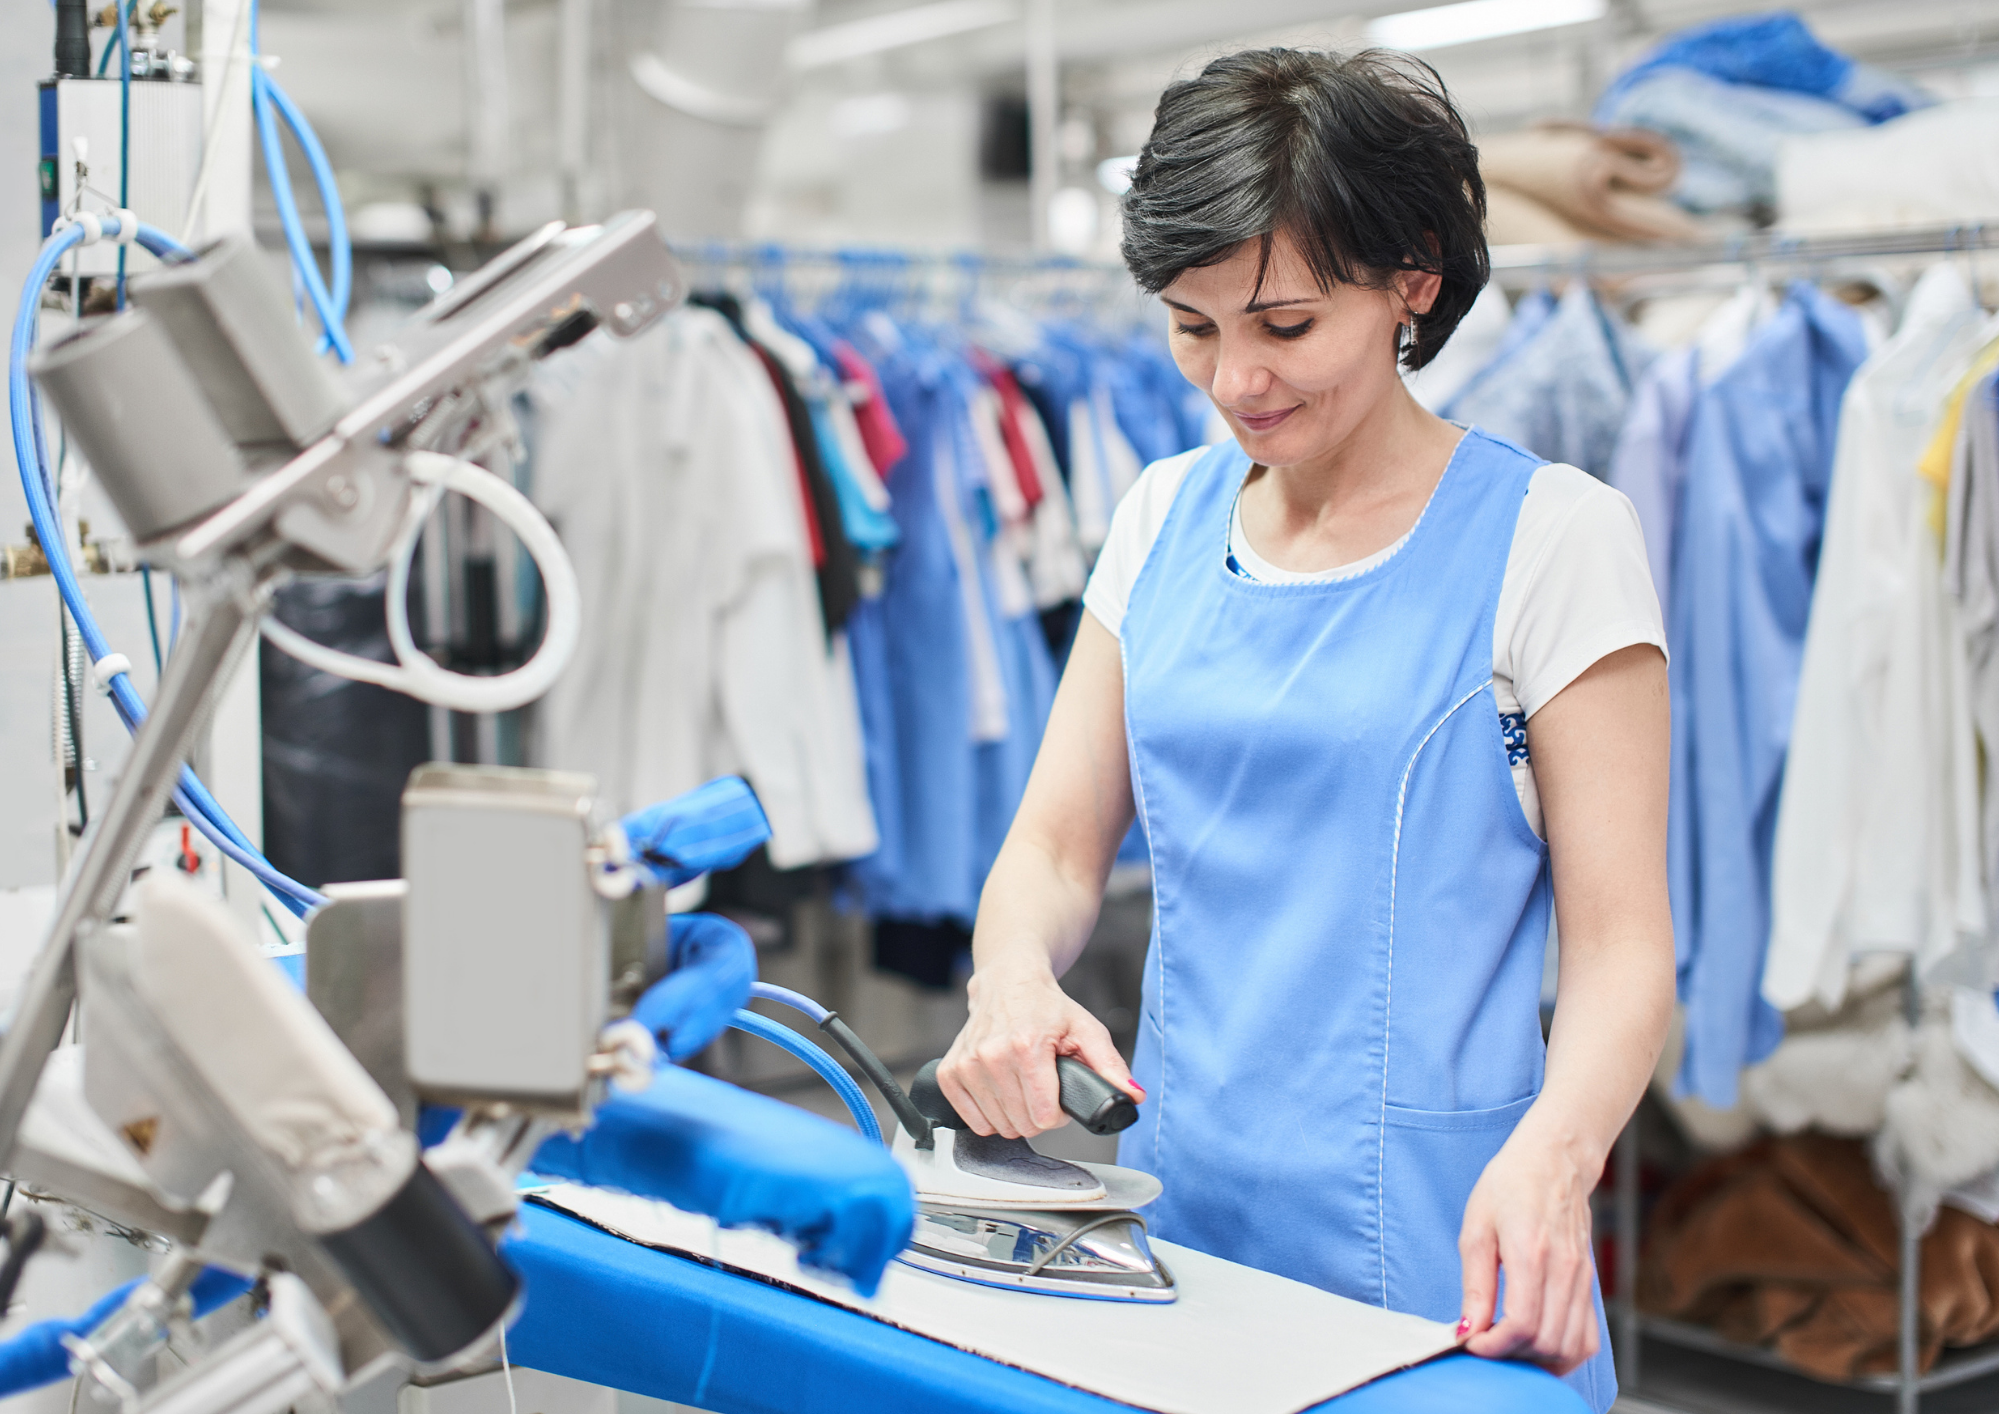 Benefits Of Using A Commercial Laundry Service